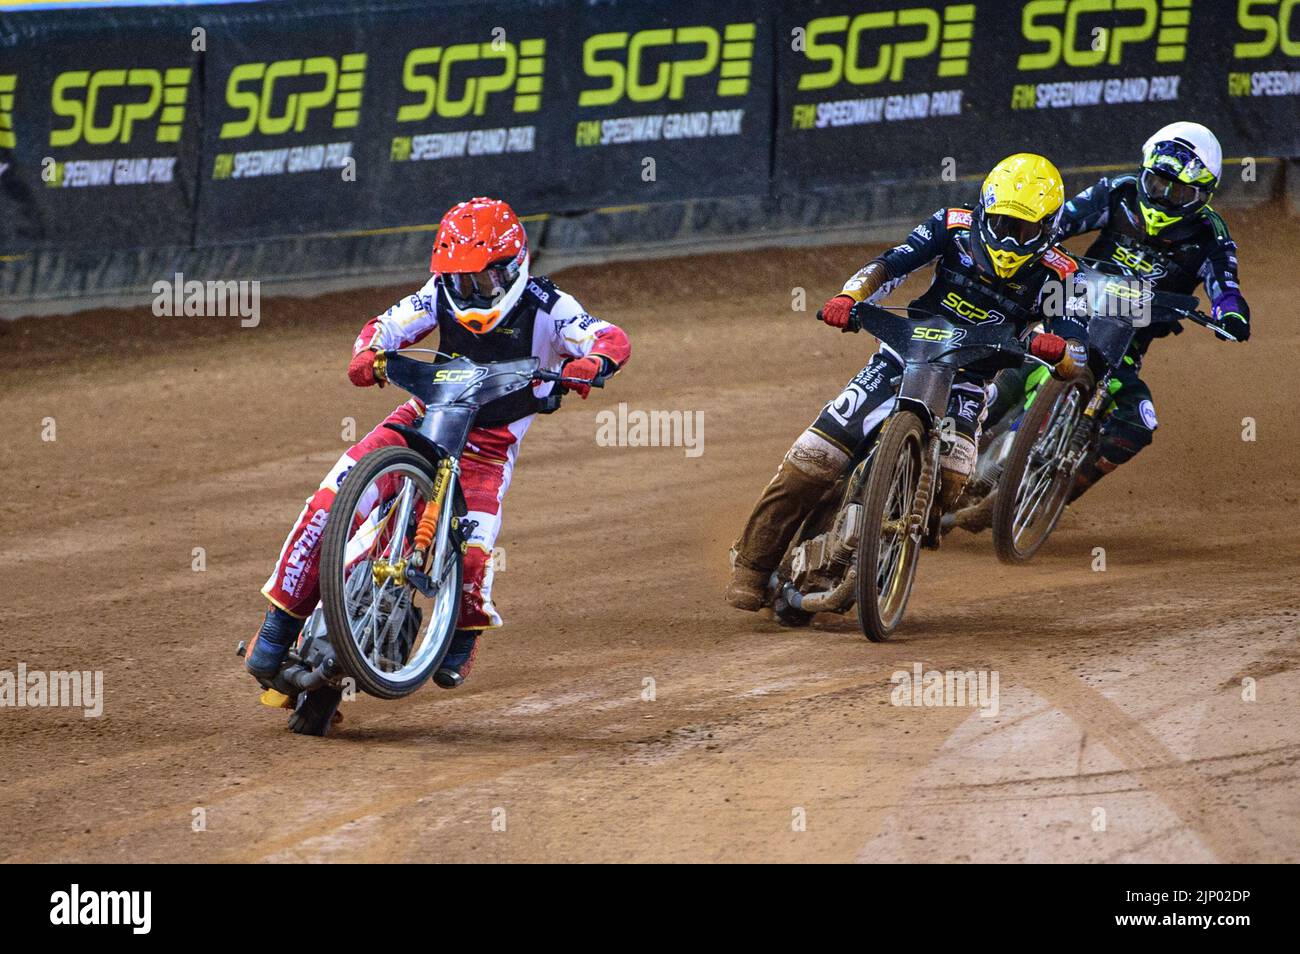 Mateusz Cierniak (Poland) (Red) picks up some drive coming out of the 2nd turn ahead of Norick Blodorn (Germany) (Yellow) and Tom Brennan (Great Britain) (White) during the FIM Speedway Grand Prix 2 of Great Britain at the Principality Stadium, Cardiff on Sunday 14th August 2022. (Credit: Ian Charles | MI News) Credit: MI News & Sport /Alamy Live News Stock Photo